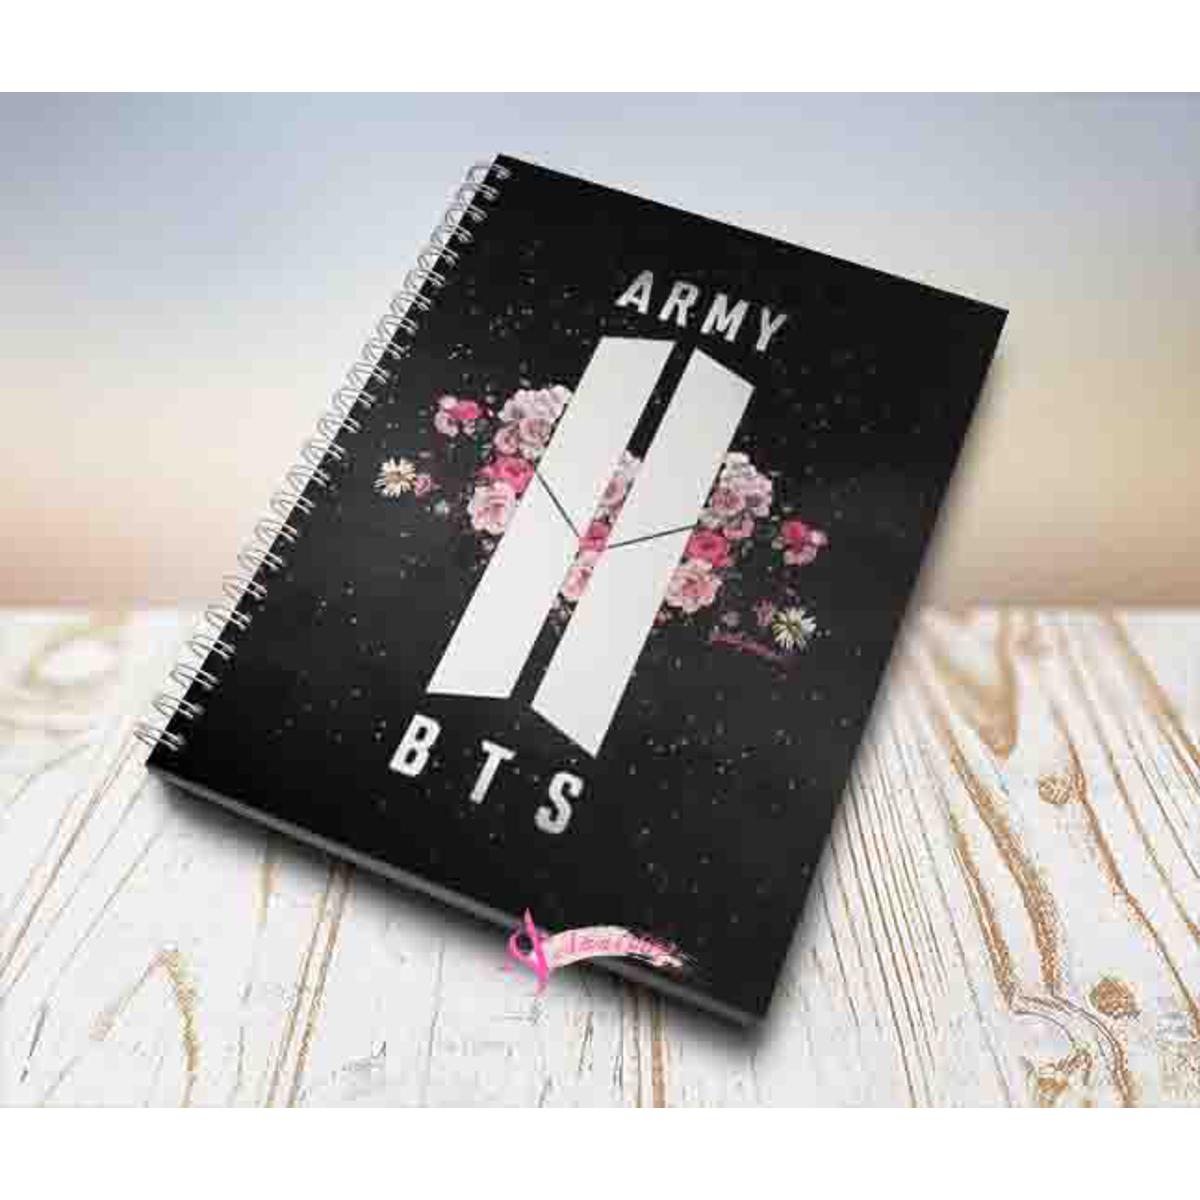 Details more than 158 gifts for bts army latest - kenmei.edu.vn